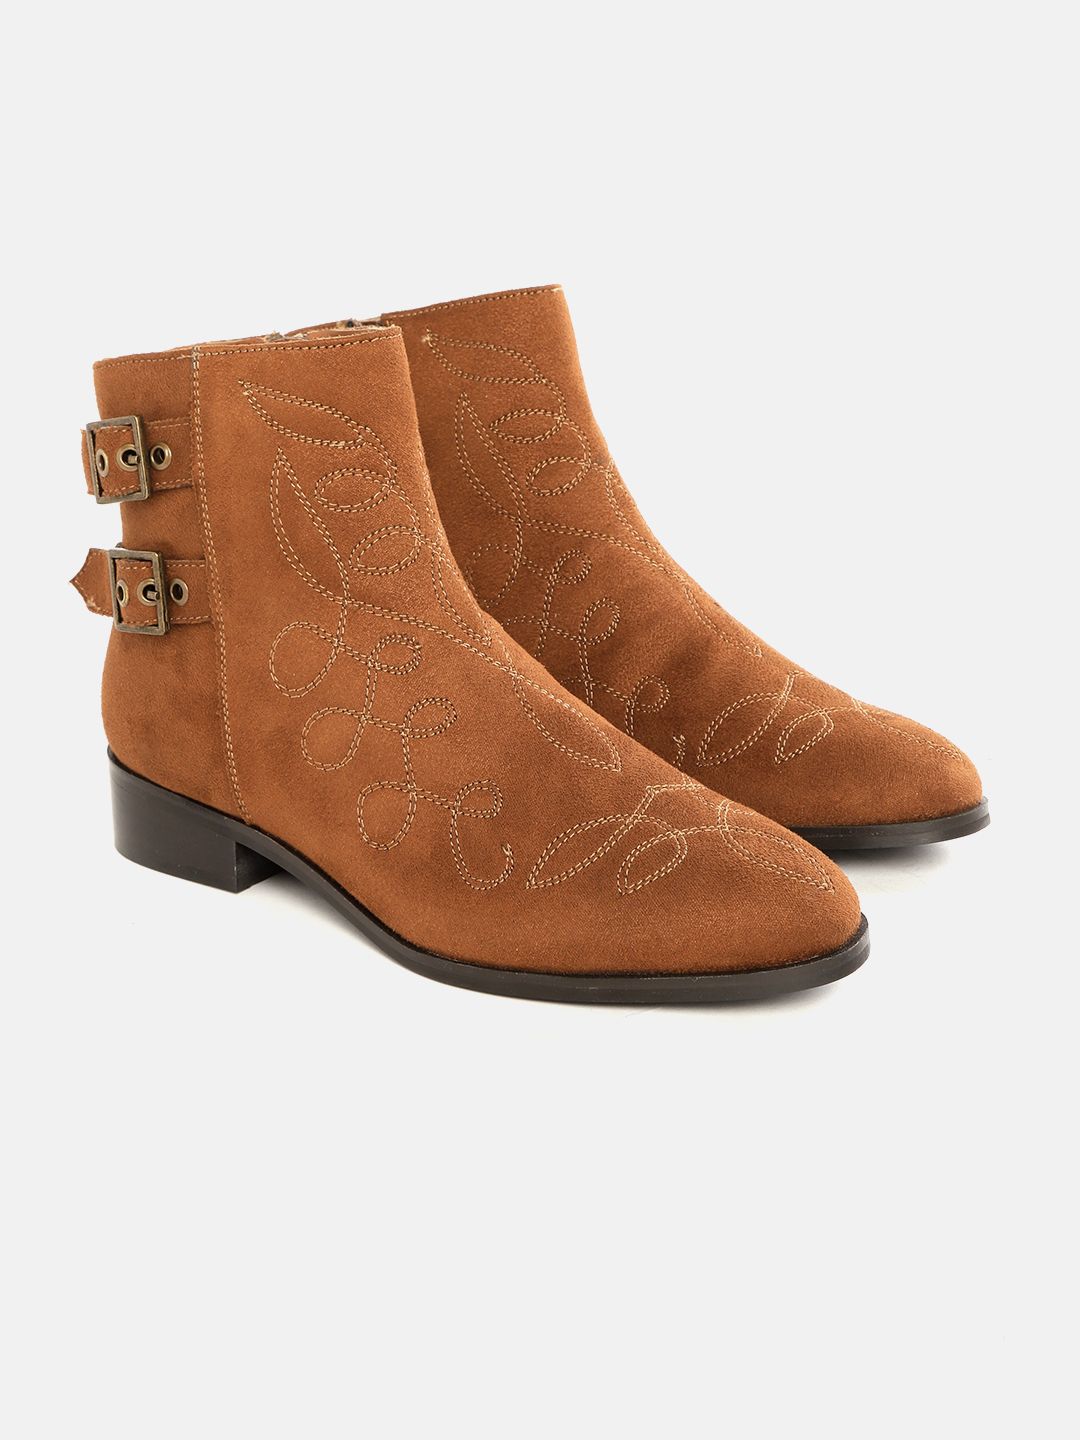 CORSICA Women Brown Suede Finish Embroidered Mid-Top Flat Boots Price in India